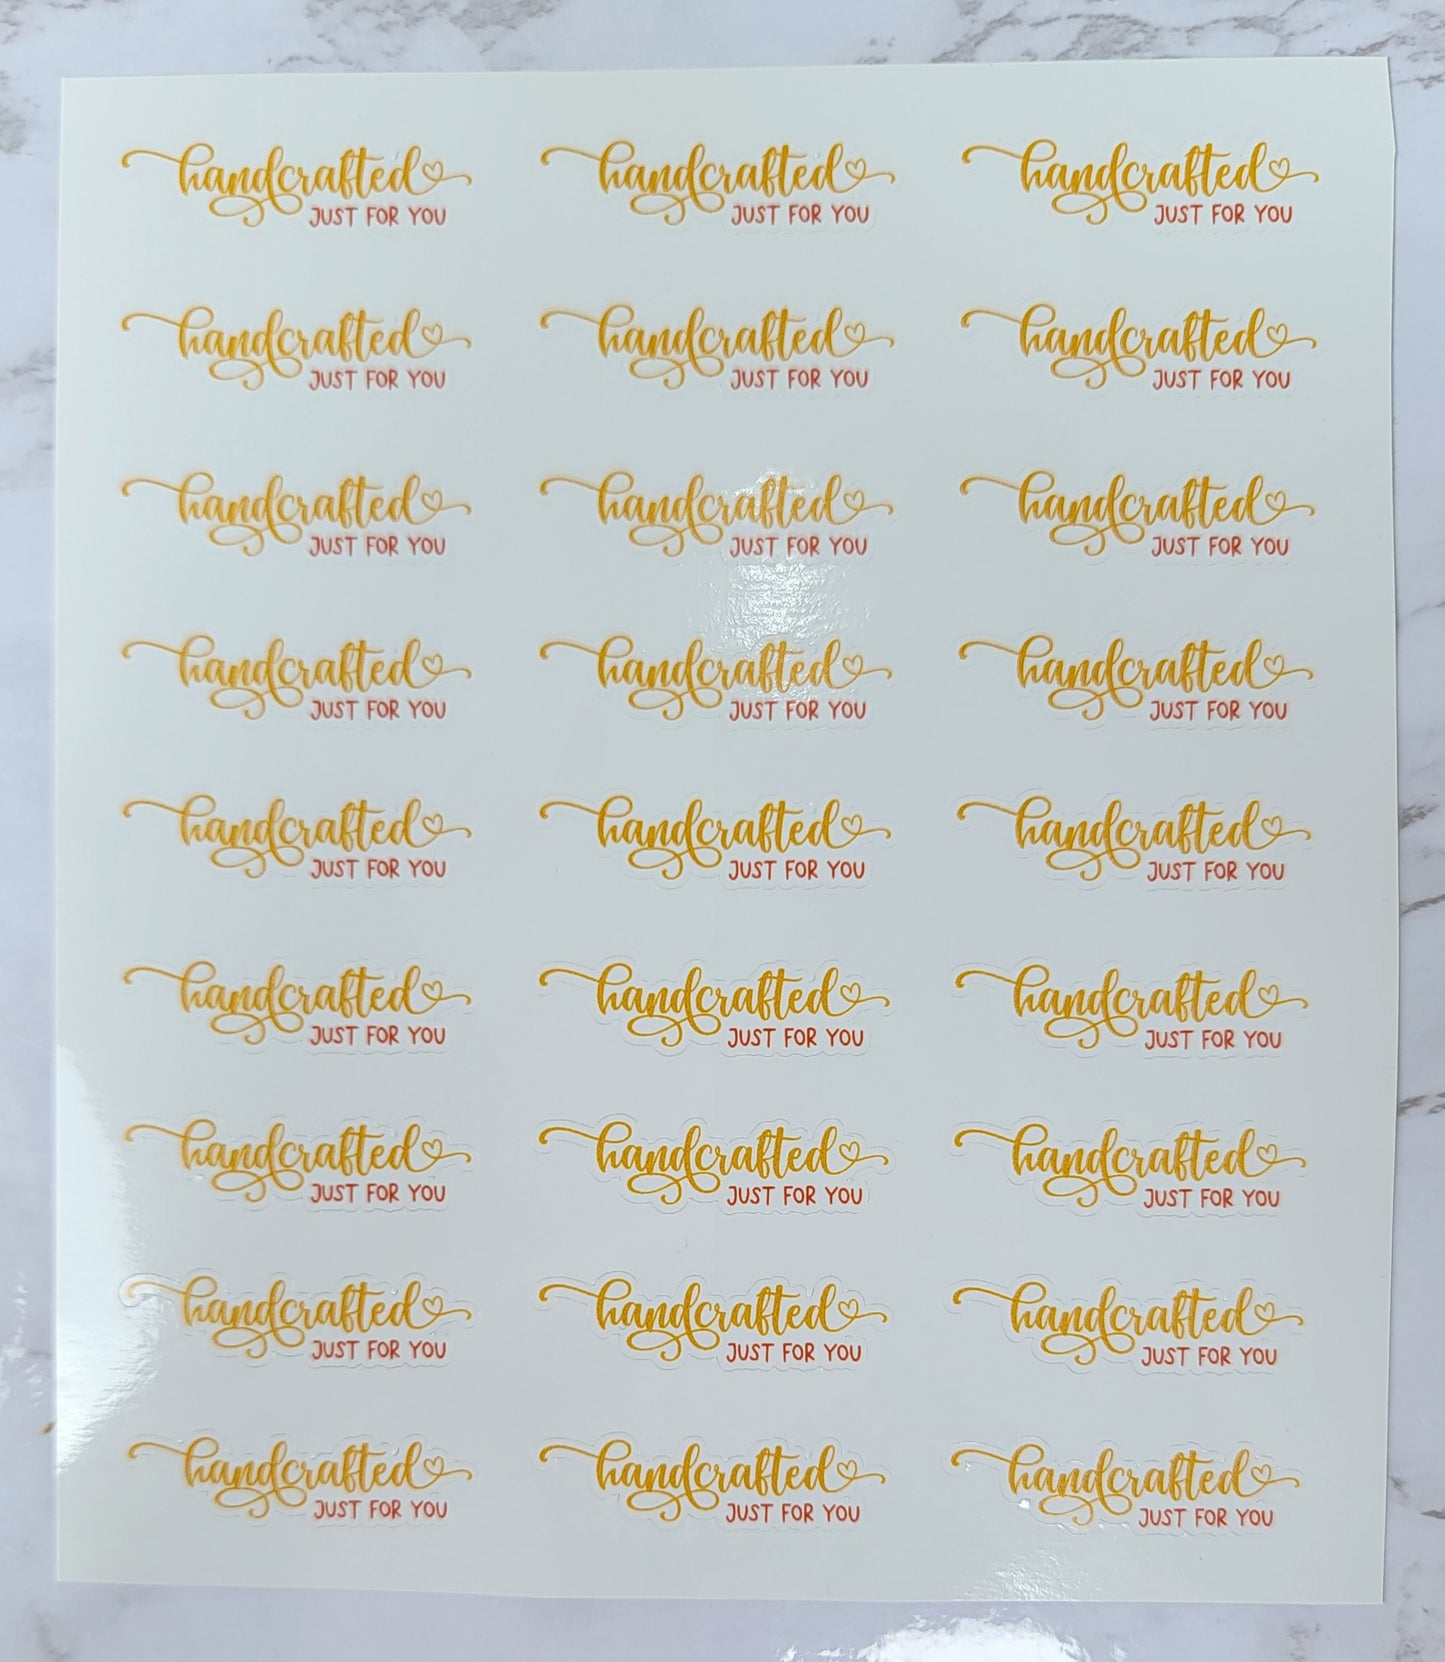 "Handcrafted Just For You" - Orange & Red Font w/ White Background - Cursive -  Waterproof Sticker Sheet